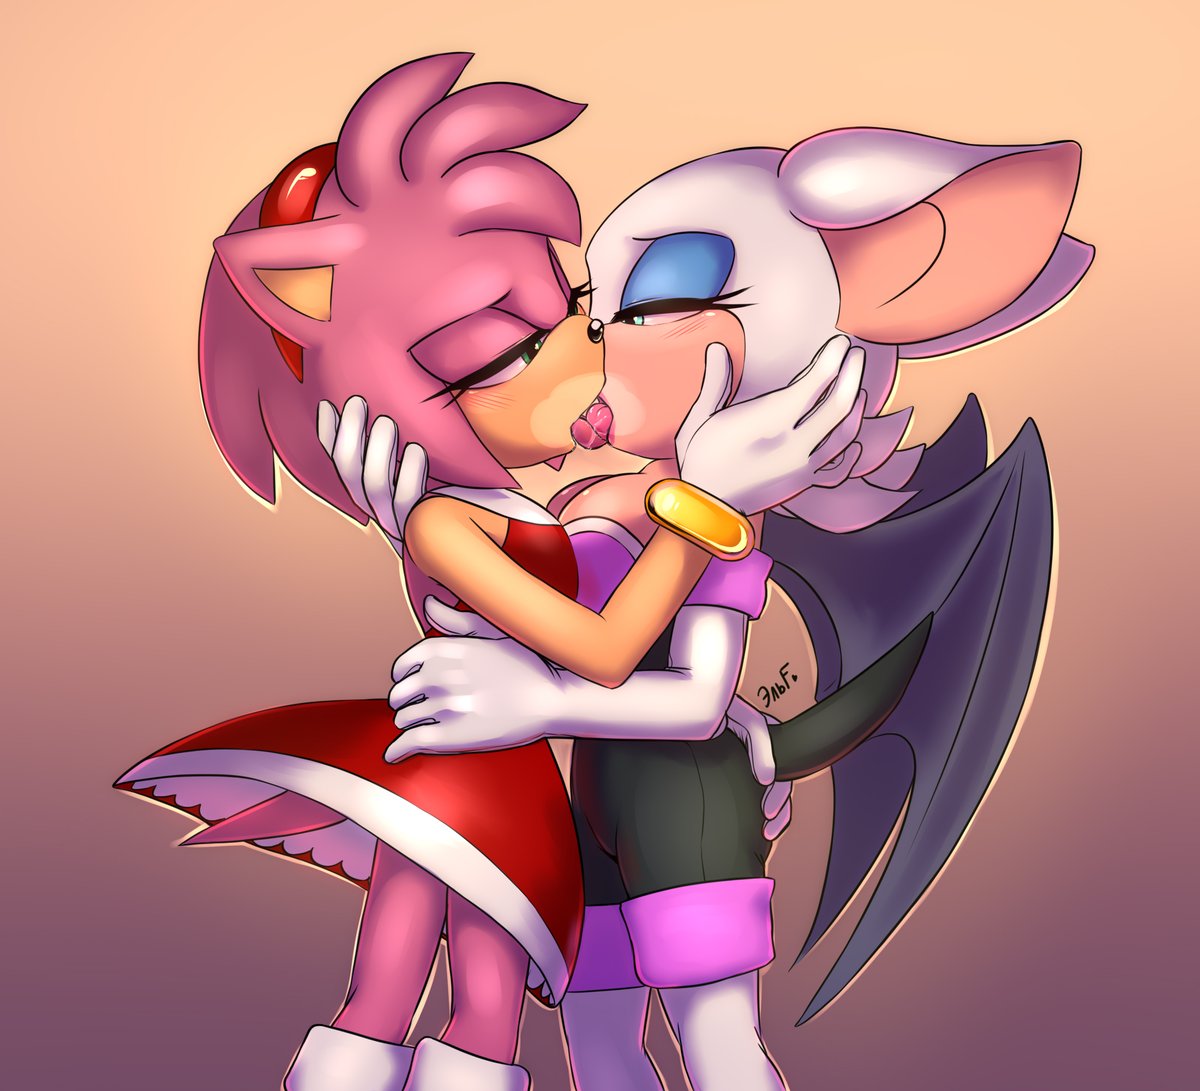 Best of Amy and rouge kiss